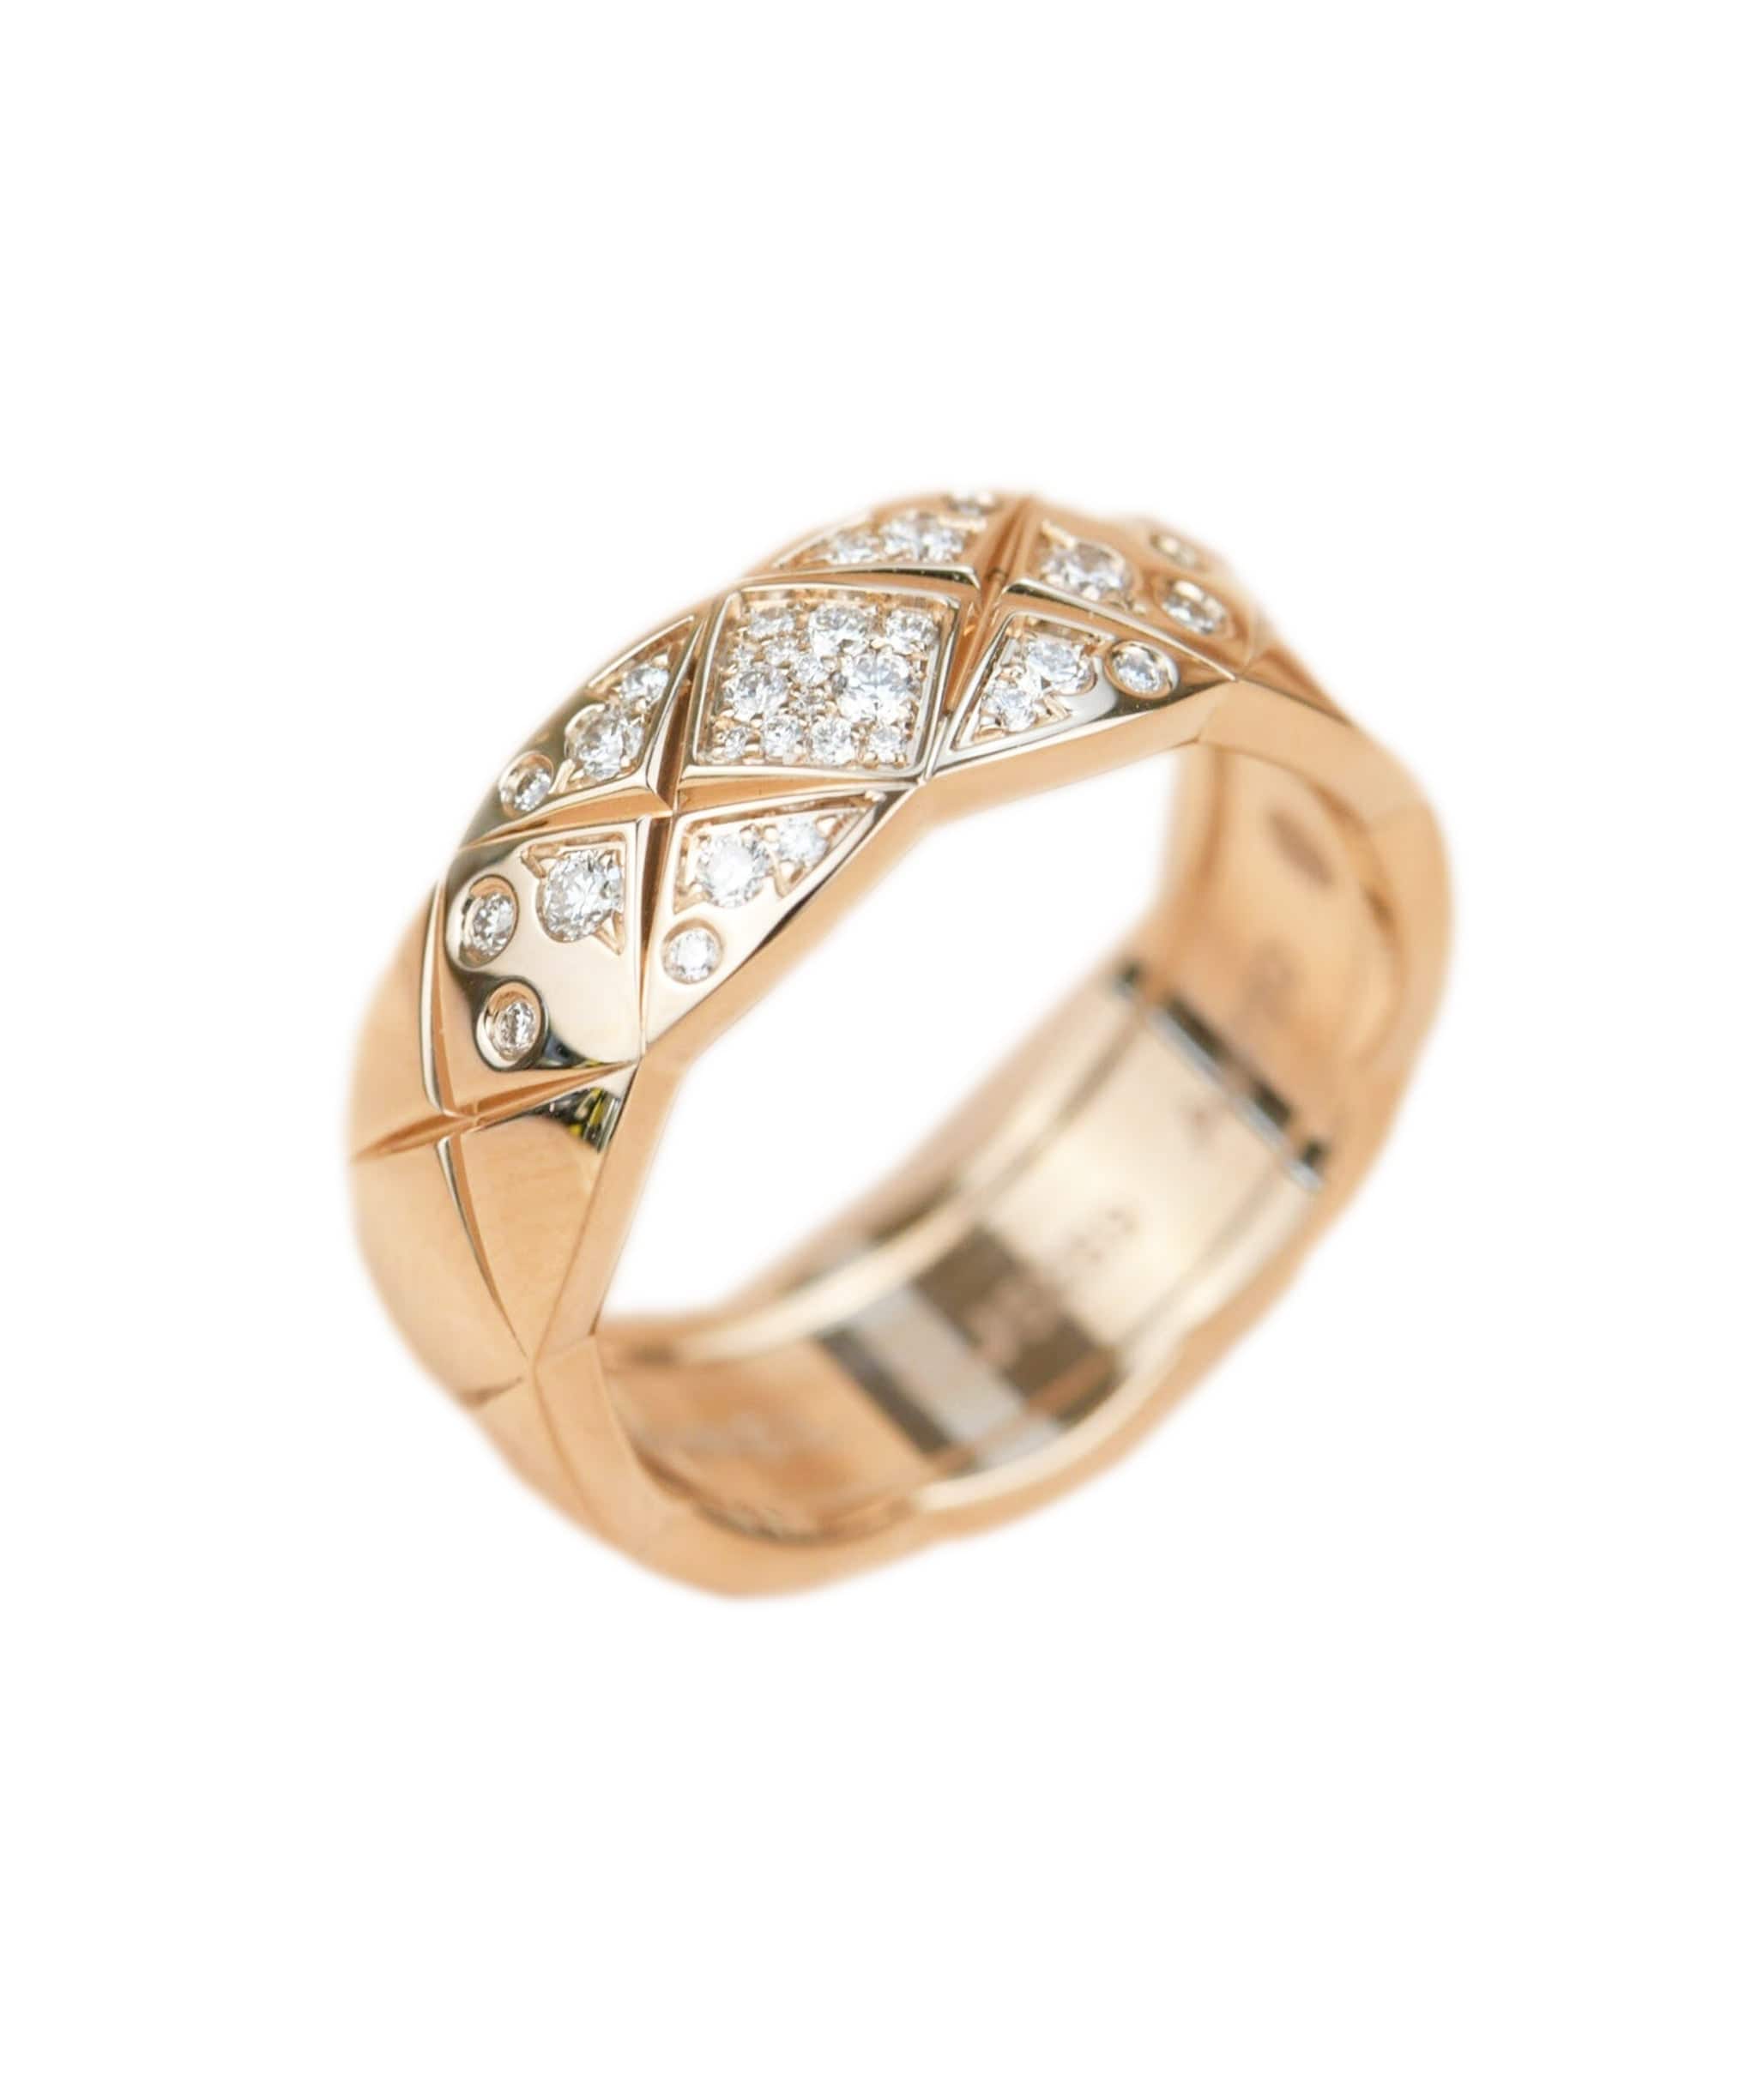 Chanel Chanel Small Rose Gold Diamond Coco Crush Ring AHC1430